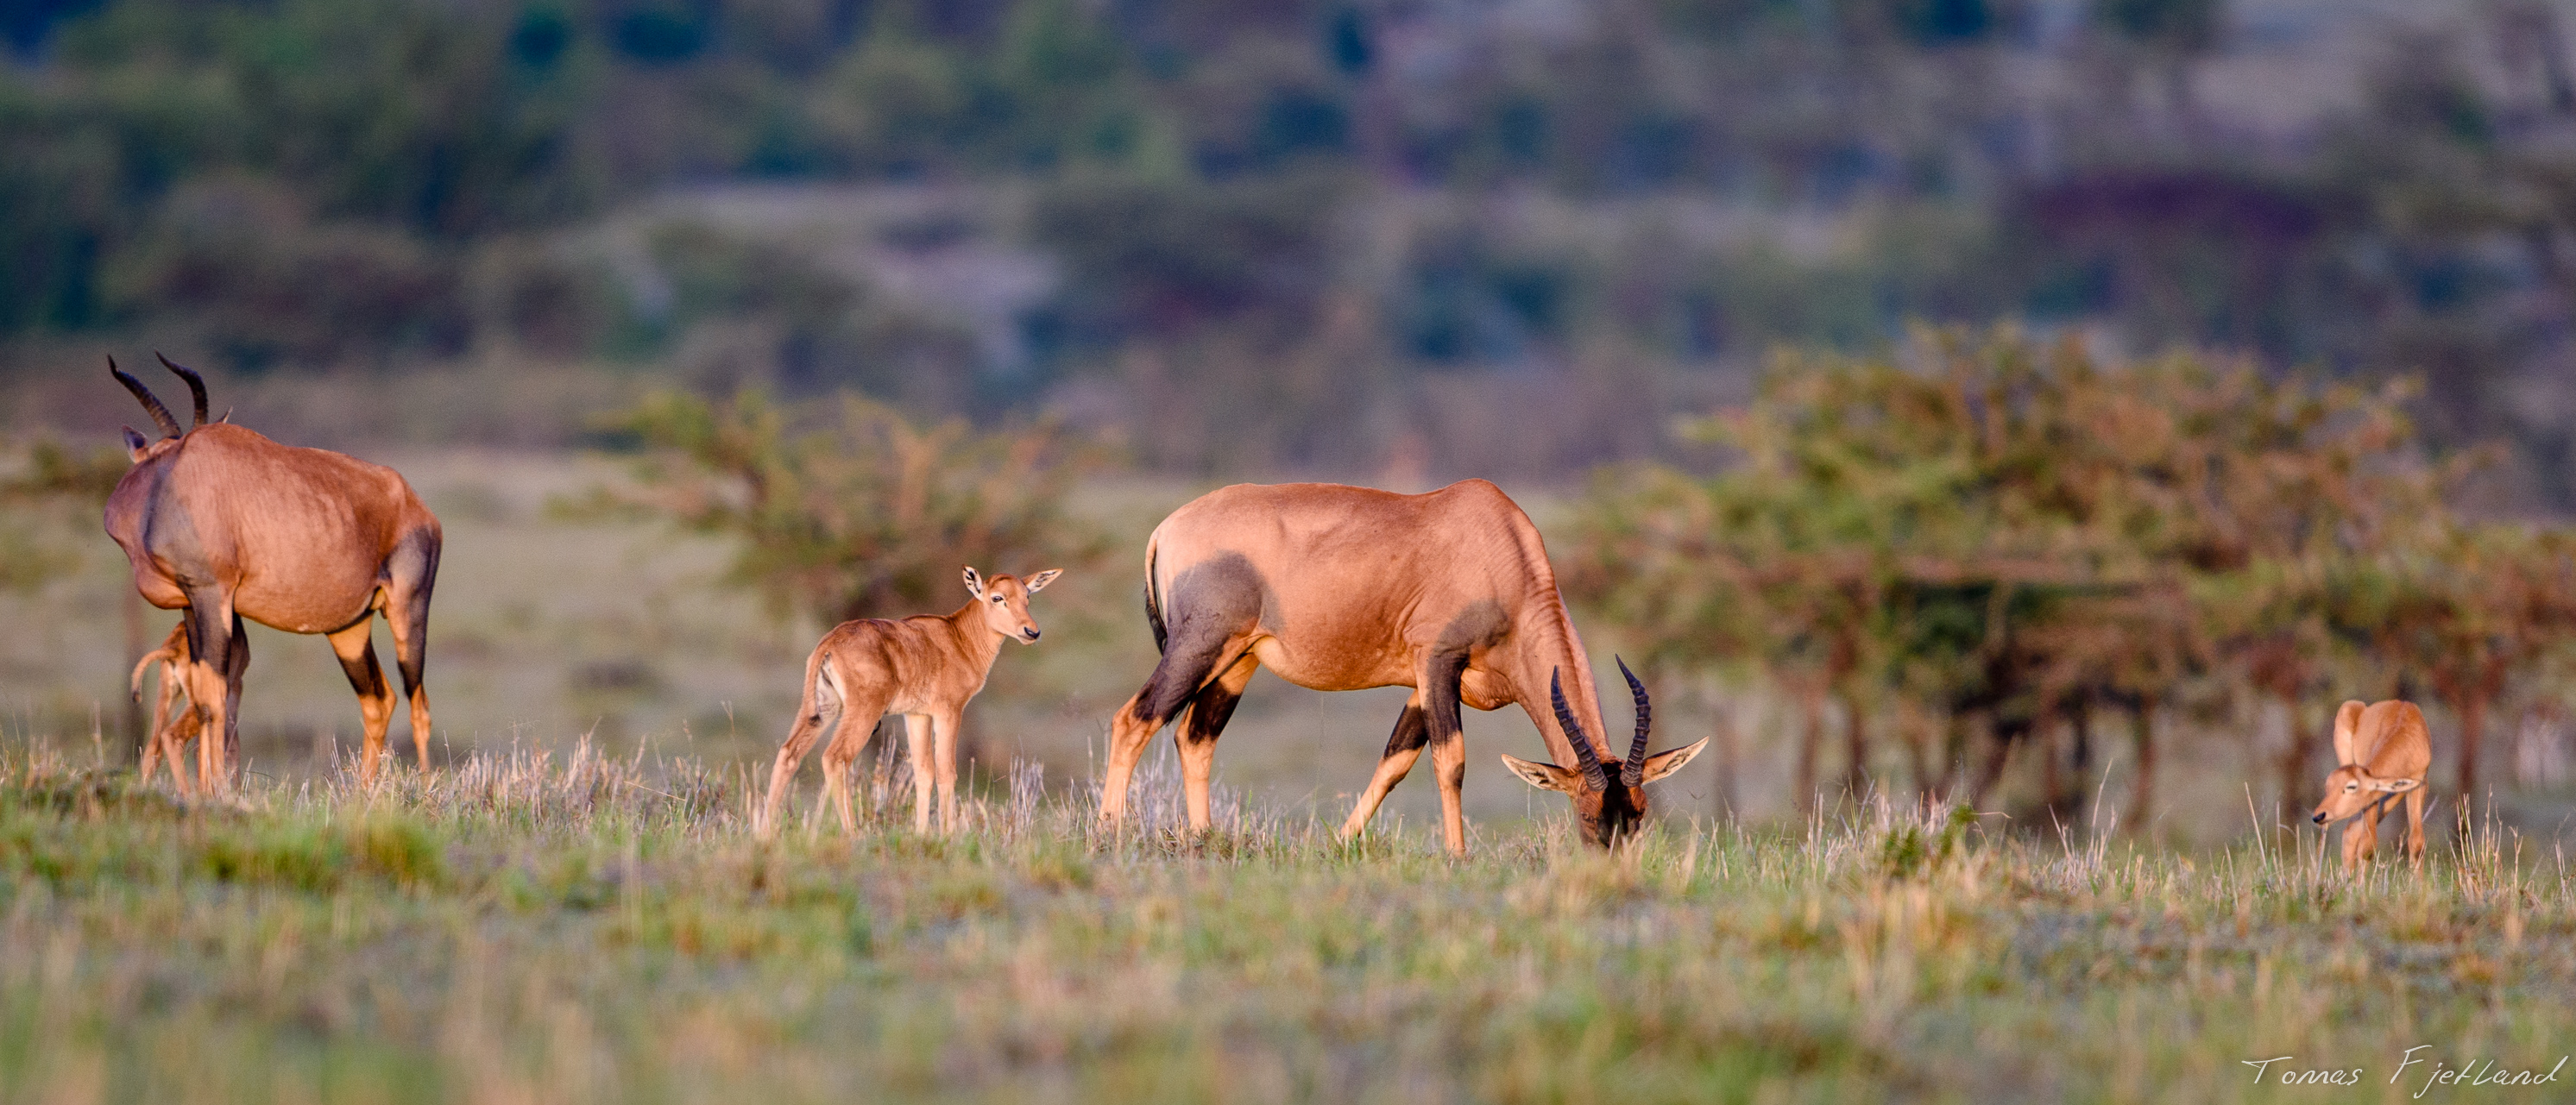 Young Topis with parents in the warm sunrise over Masai Mara. The one on the left is newborn and still leaning against its mother